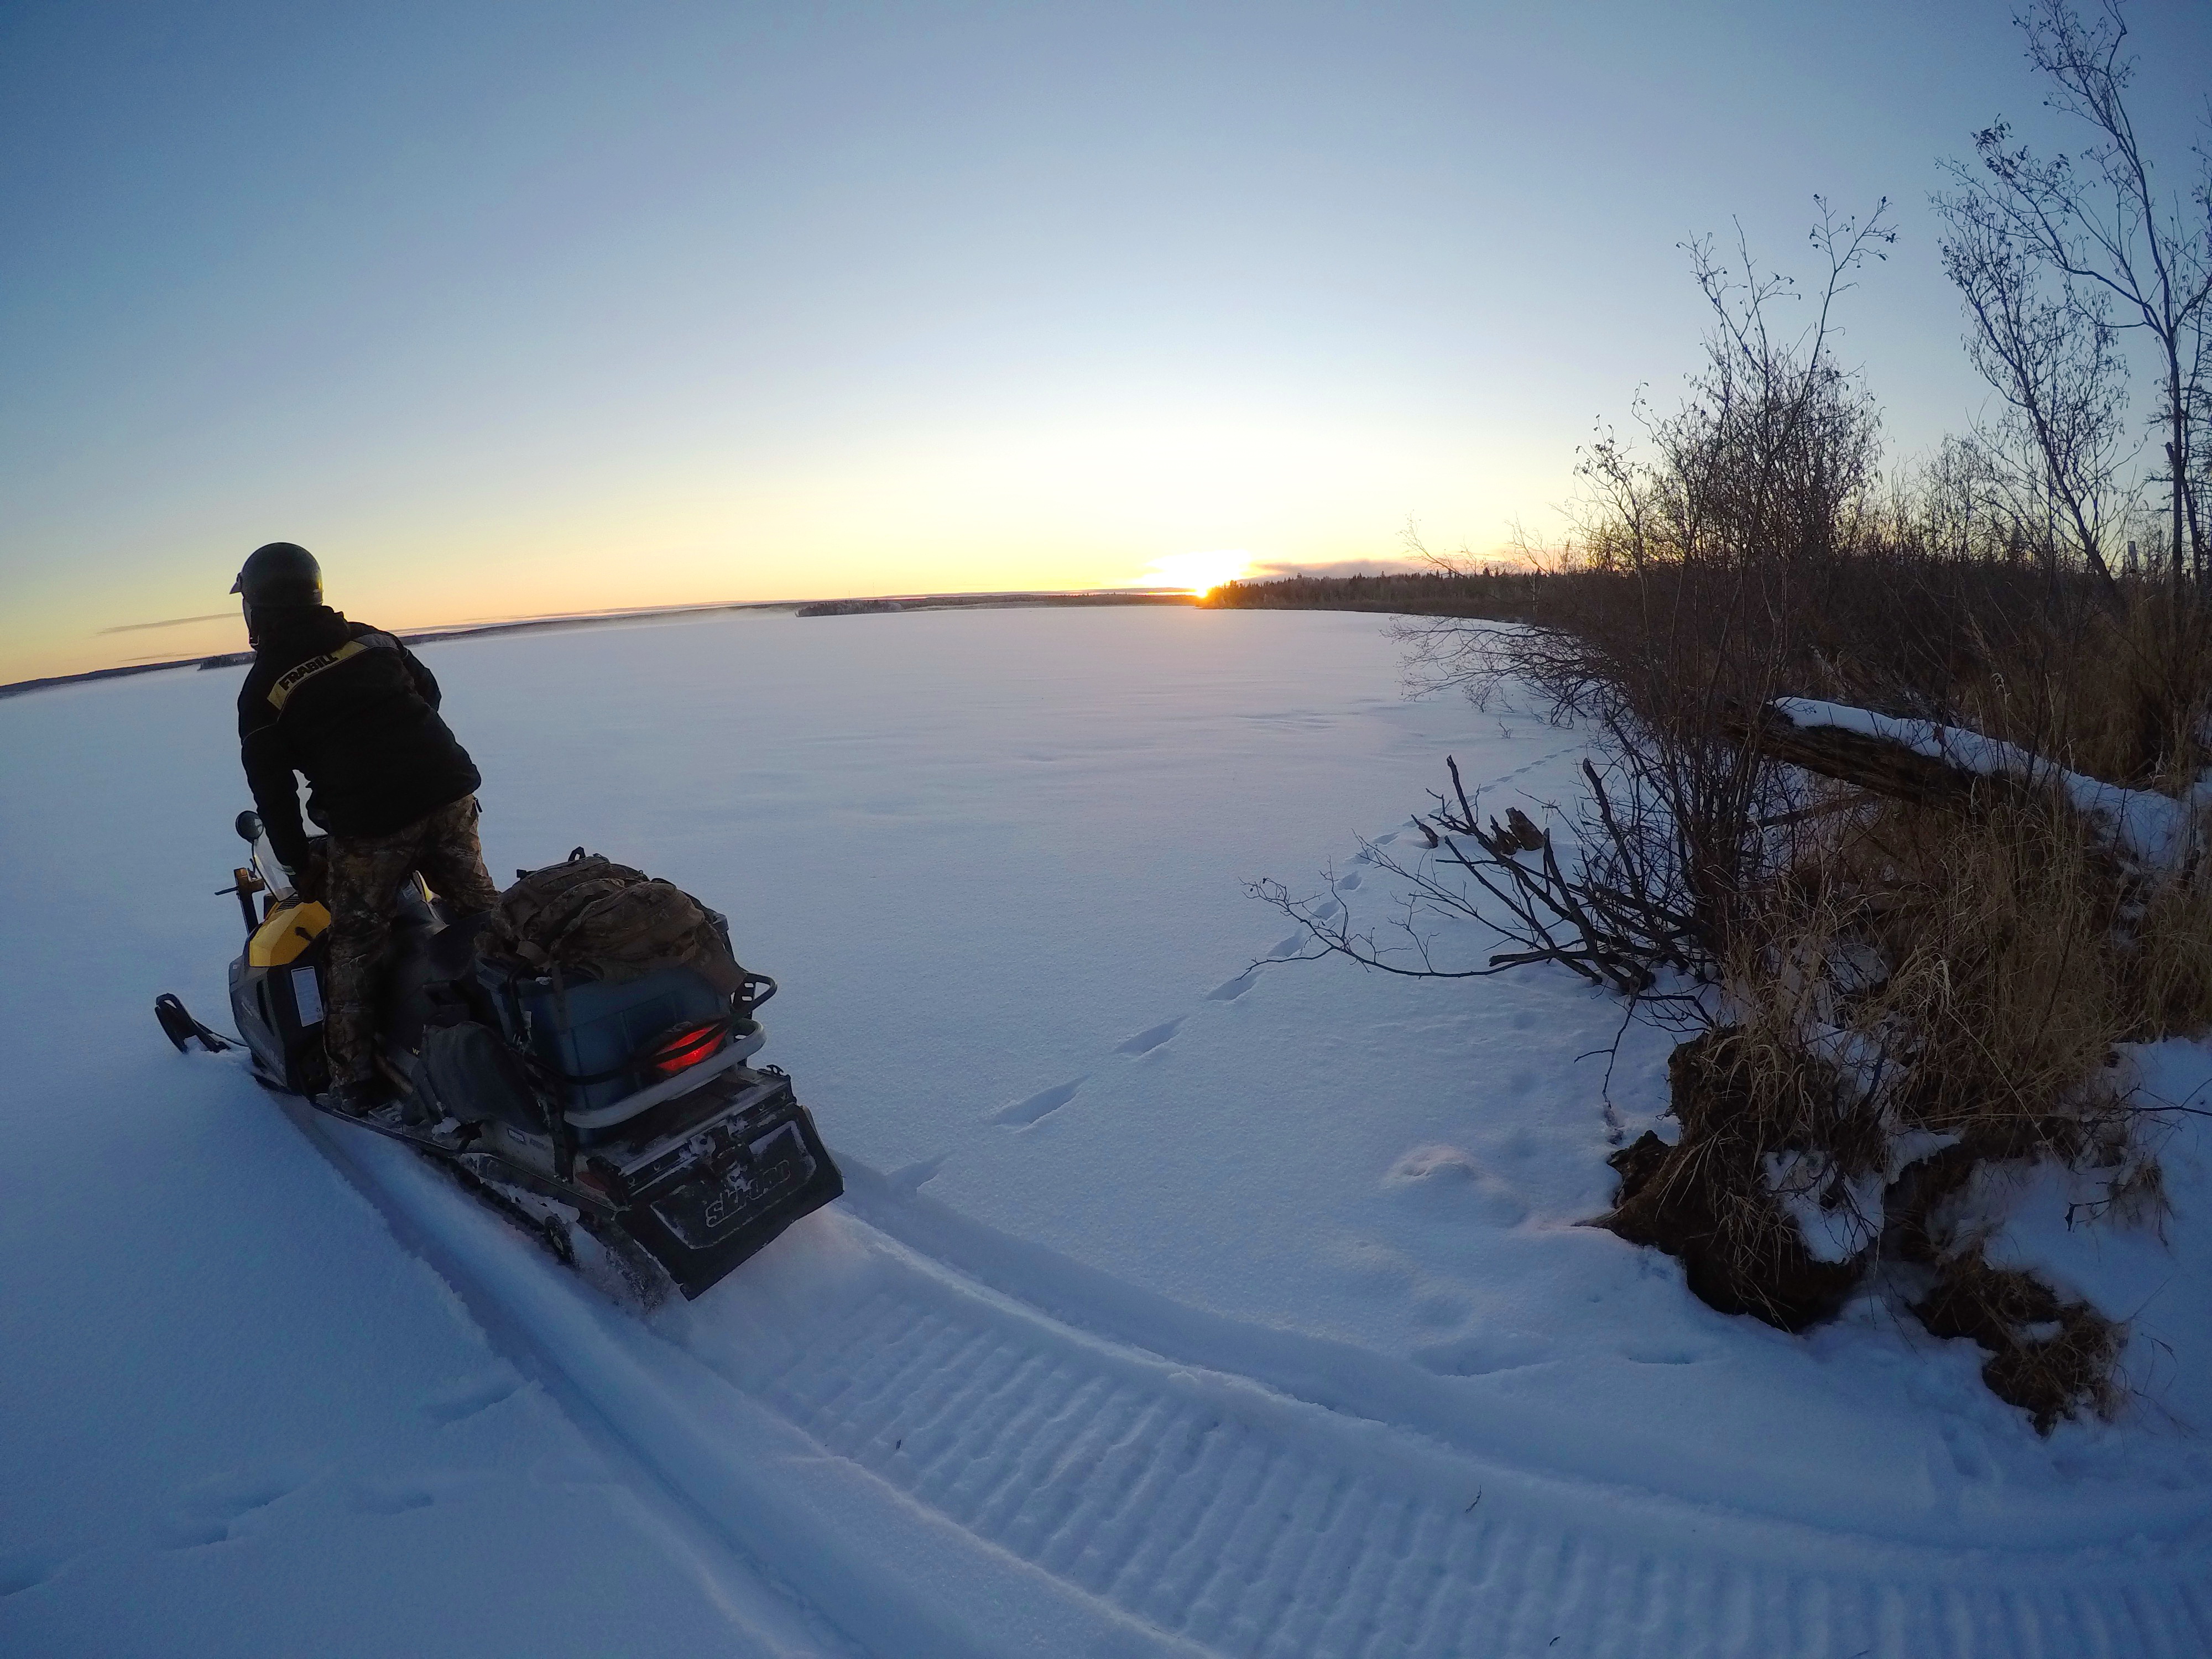 Snowmobiles will get you to the best fishing spots in a heartbeat